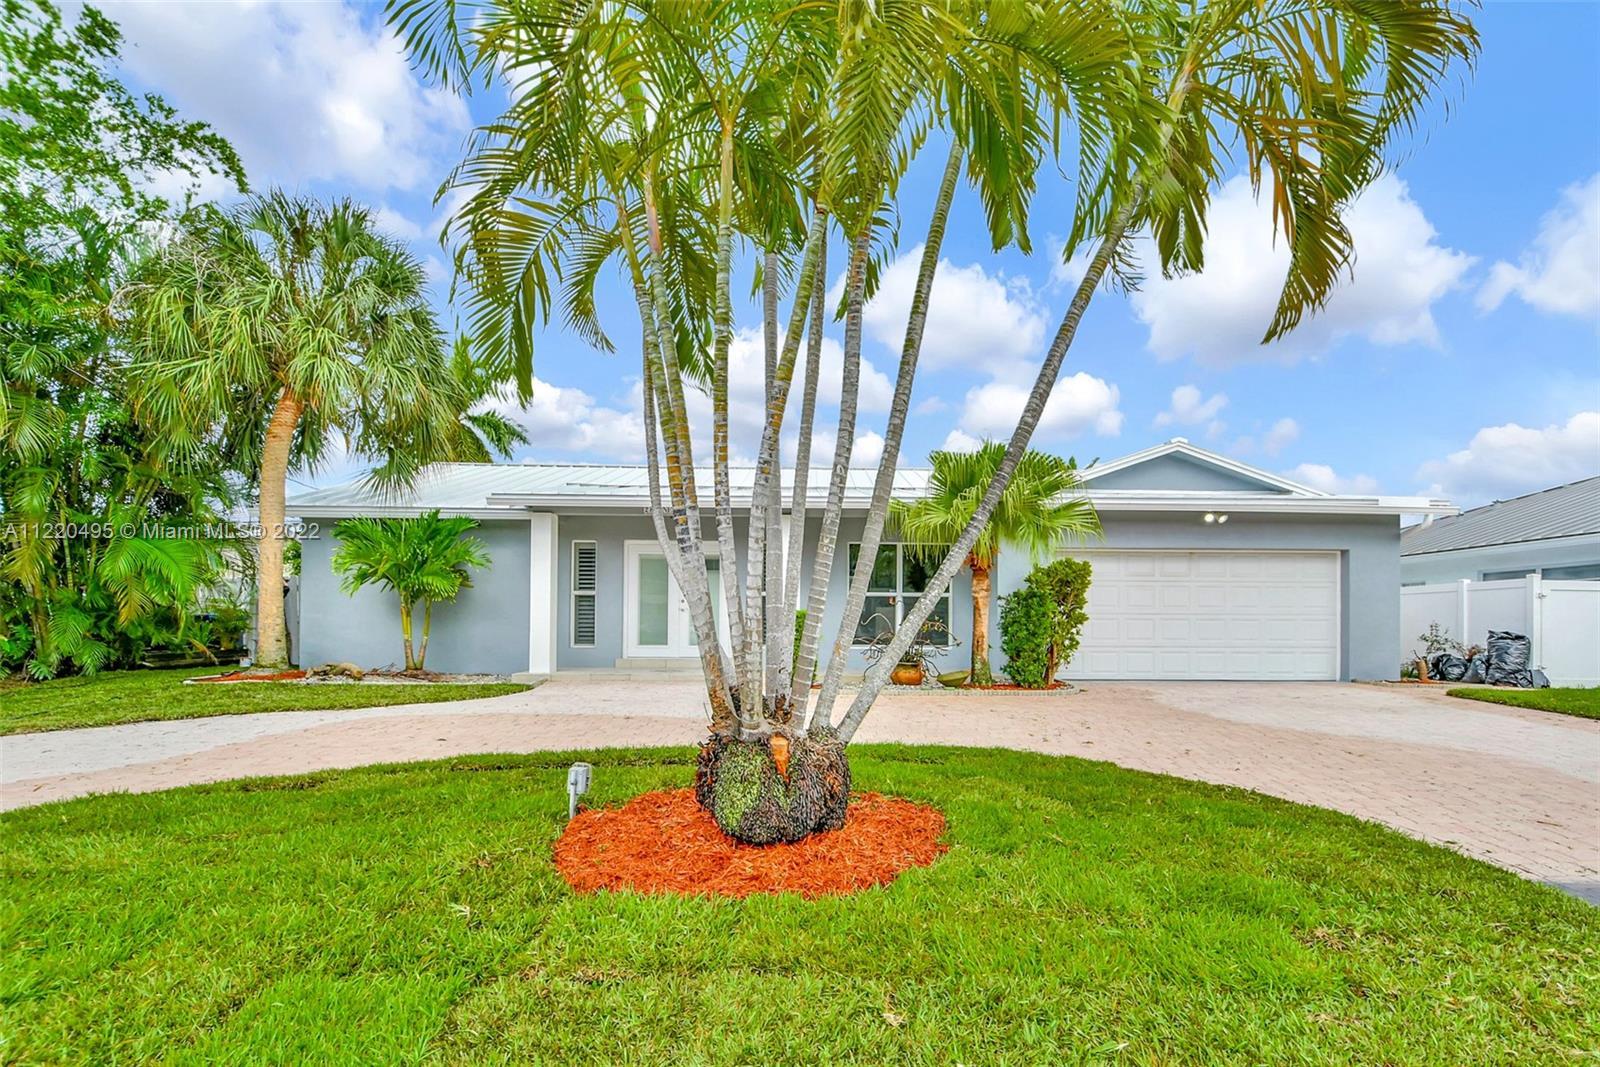 Beautiful updated home with 55 feet of tranquil waterfront in East Fort Lauderdale's sought after La